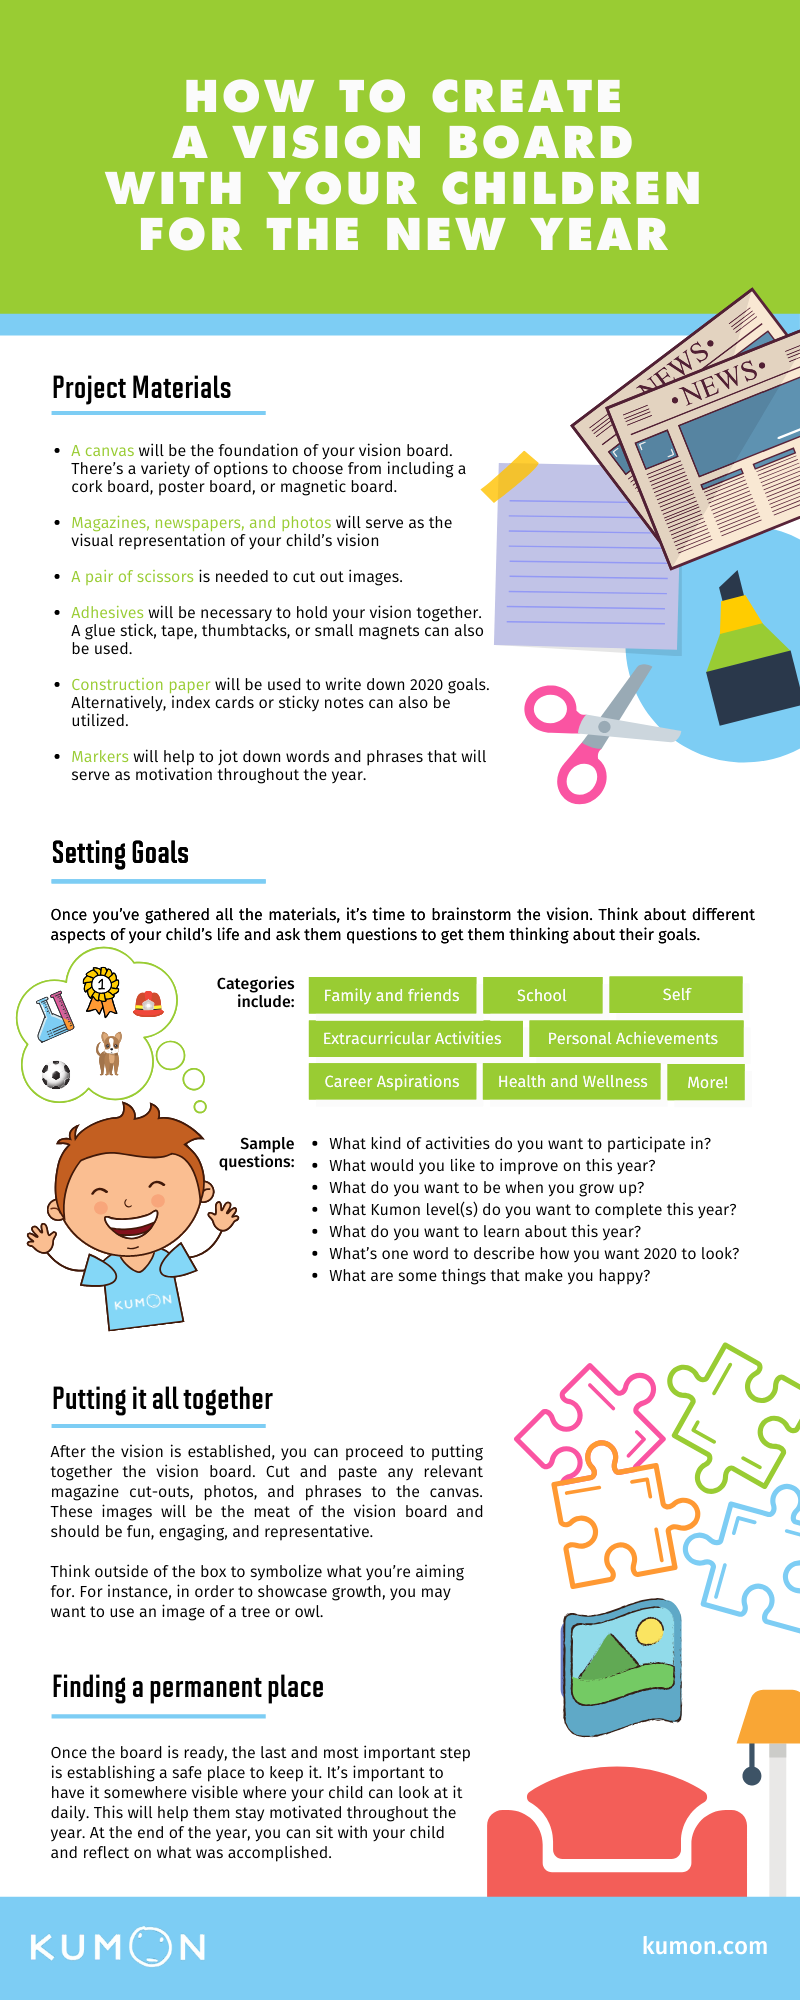 How to create a vision board with your child infographic. Steps include materials needed, goal setting, putting it altogether, and find a permanent lace.